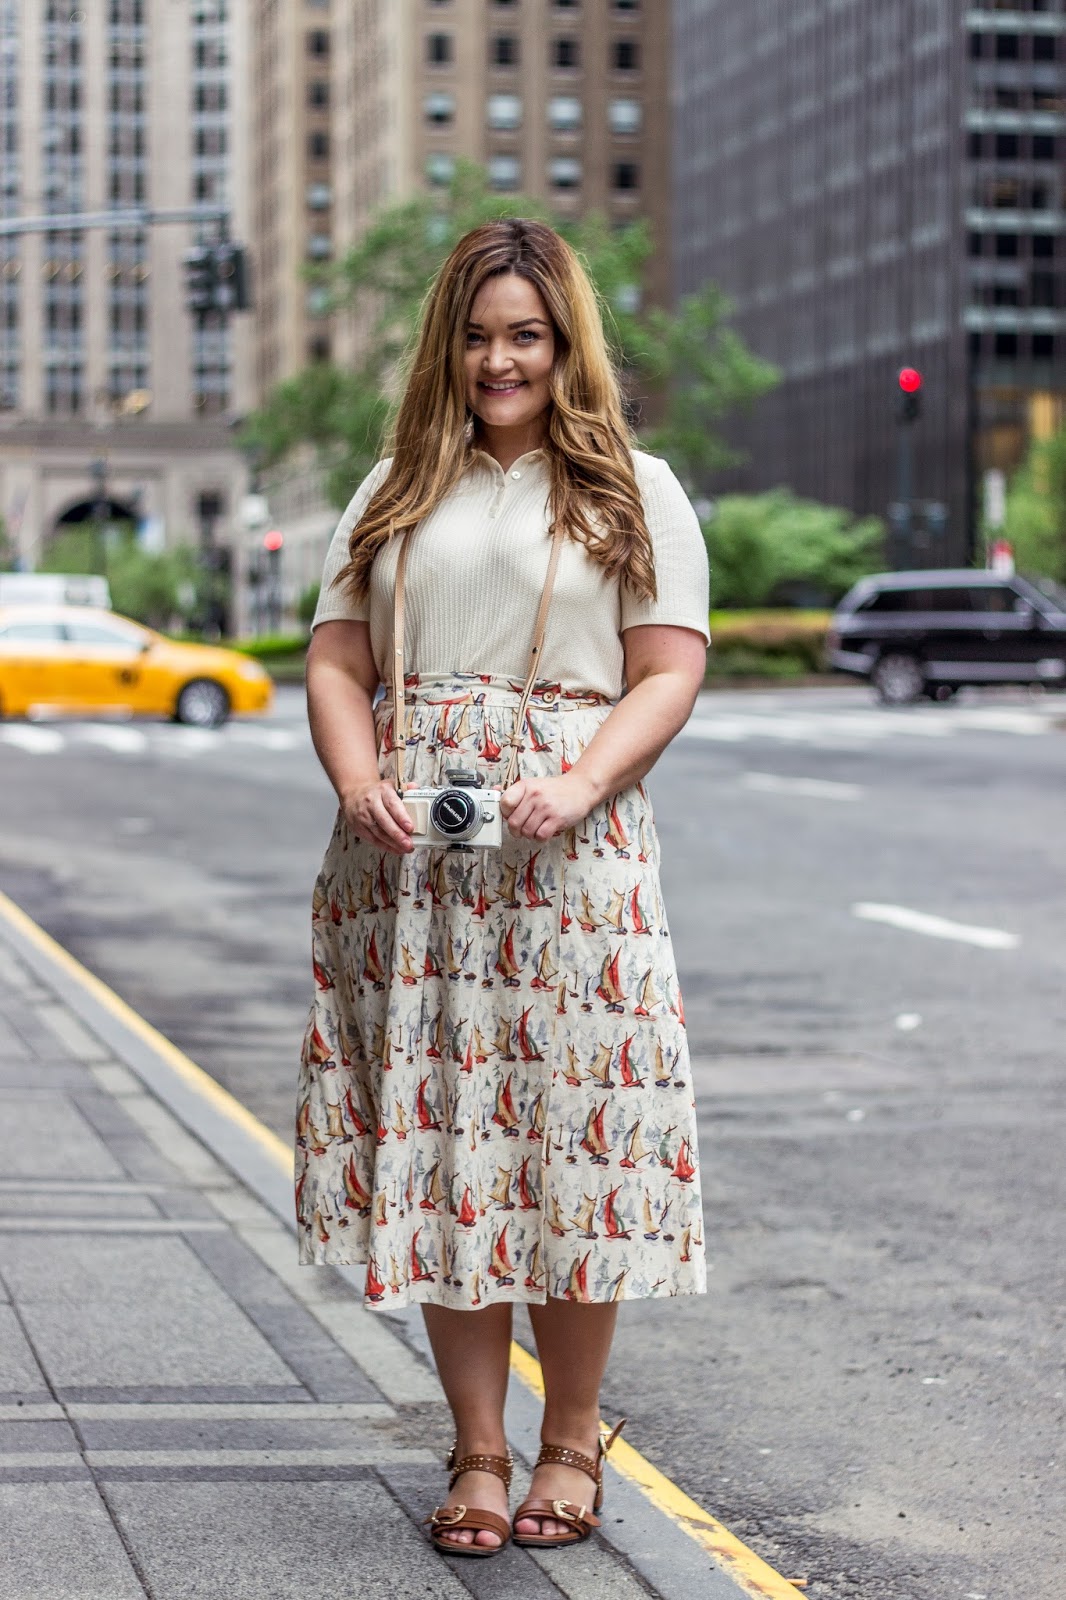 Summer style in the city - Dainty Dress Diaries